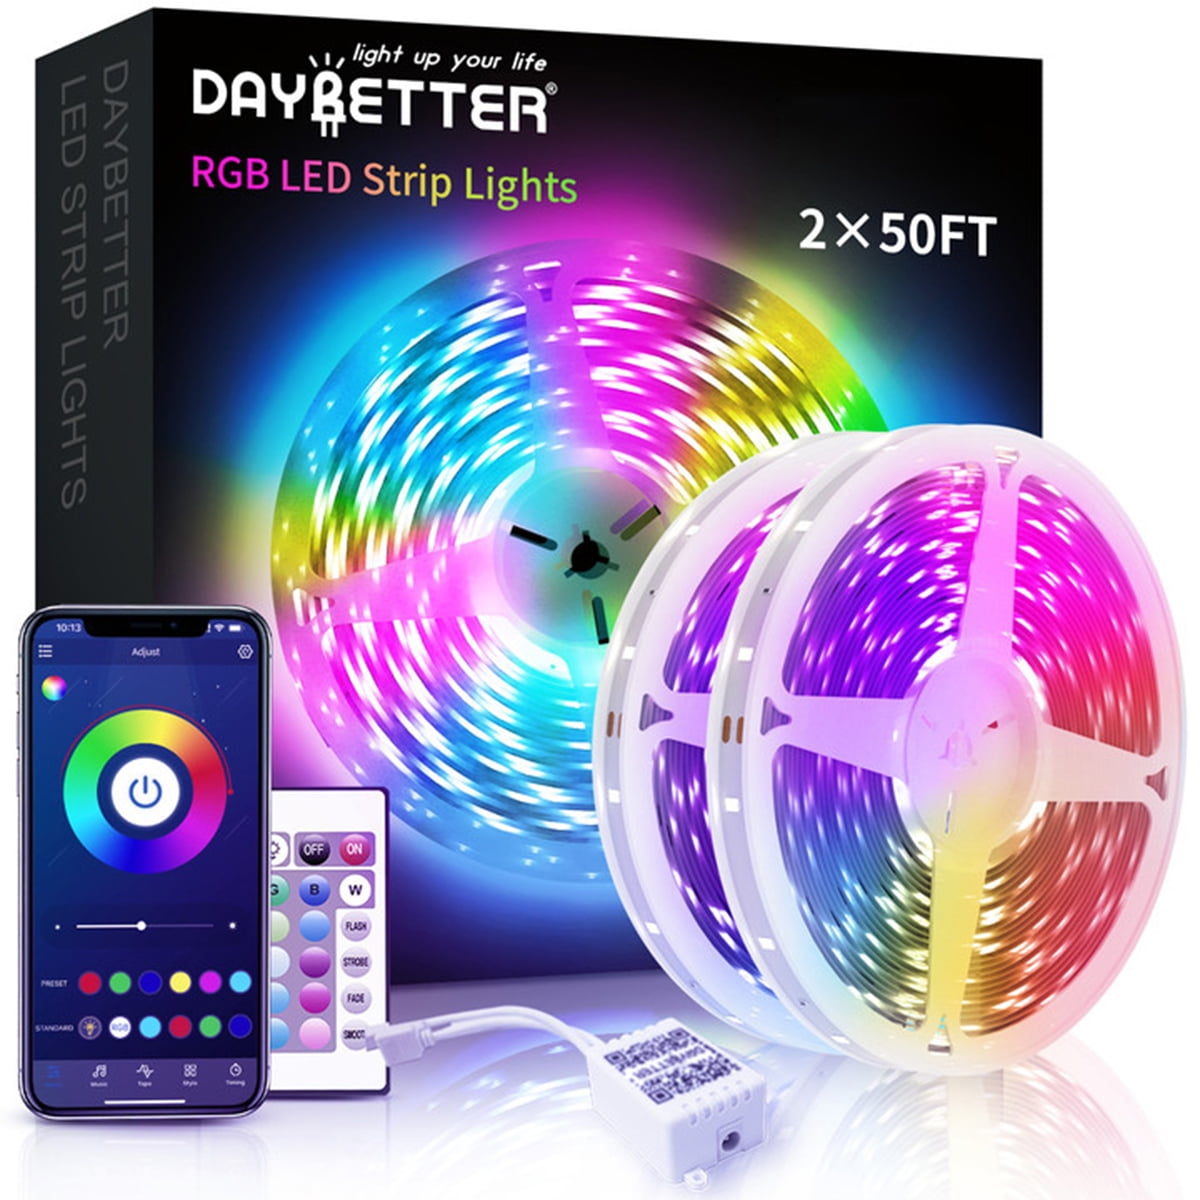 DAYBETTER Led Strip Light Strips App Control Remote,24V 5050 RGB for Bedroom, Music Sync Color Changing Lights for Room Party - Walmart.com